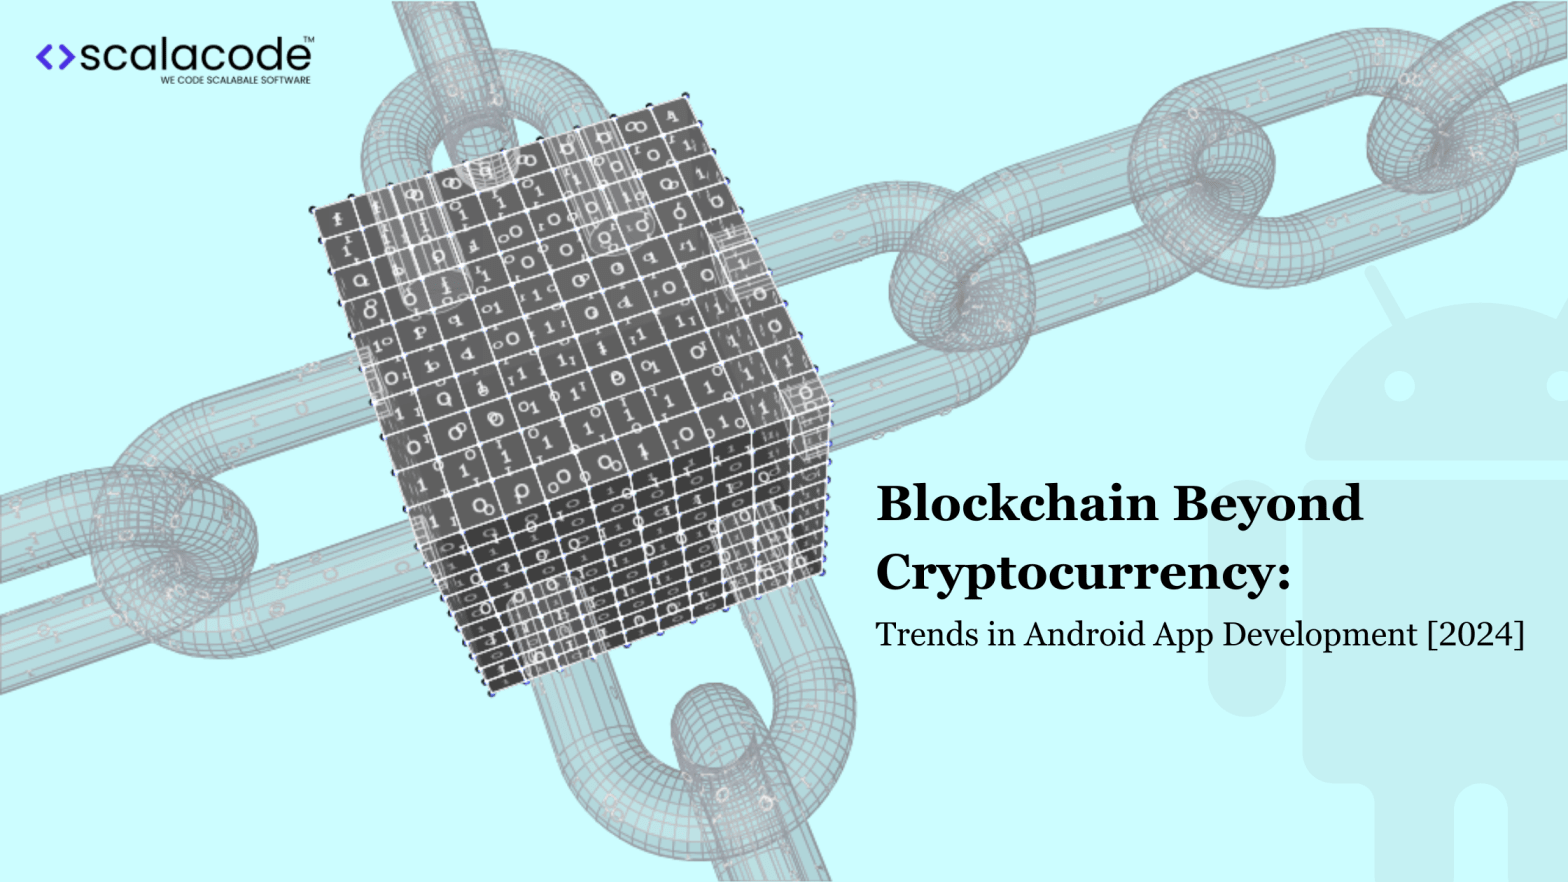 Blockchain Beyond Cryptocurrency: Trends in Android App Development [2024]